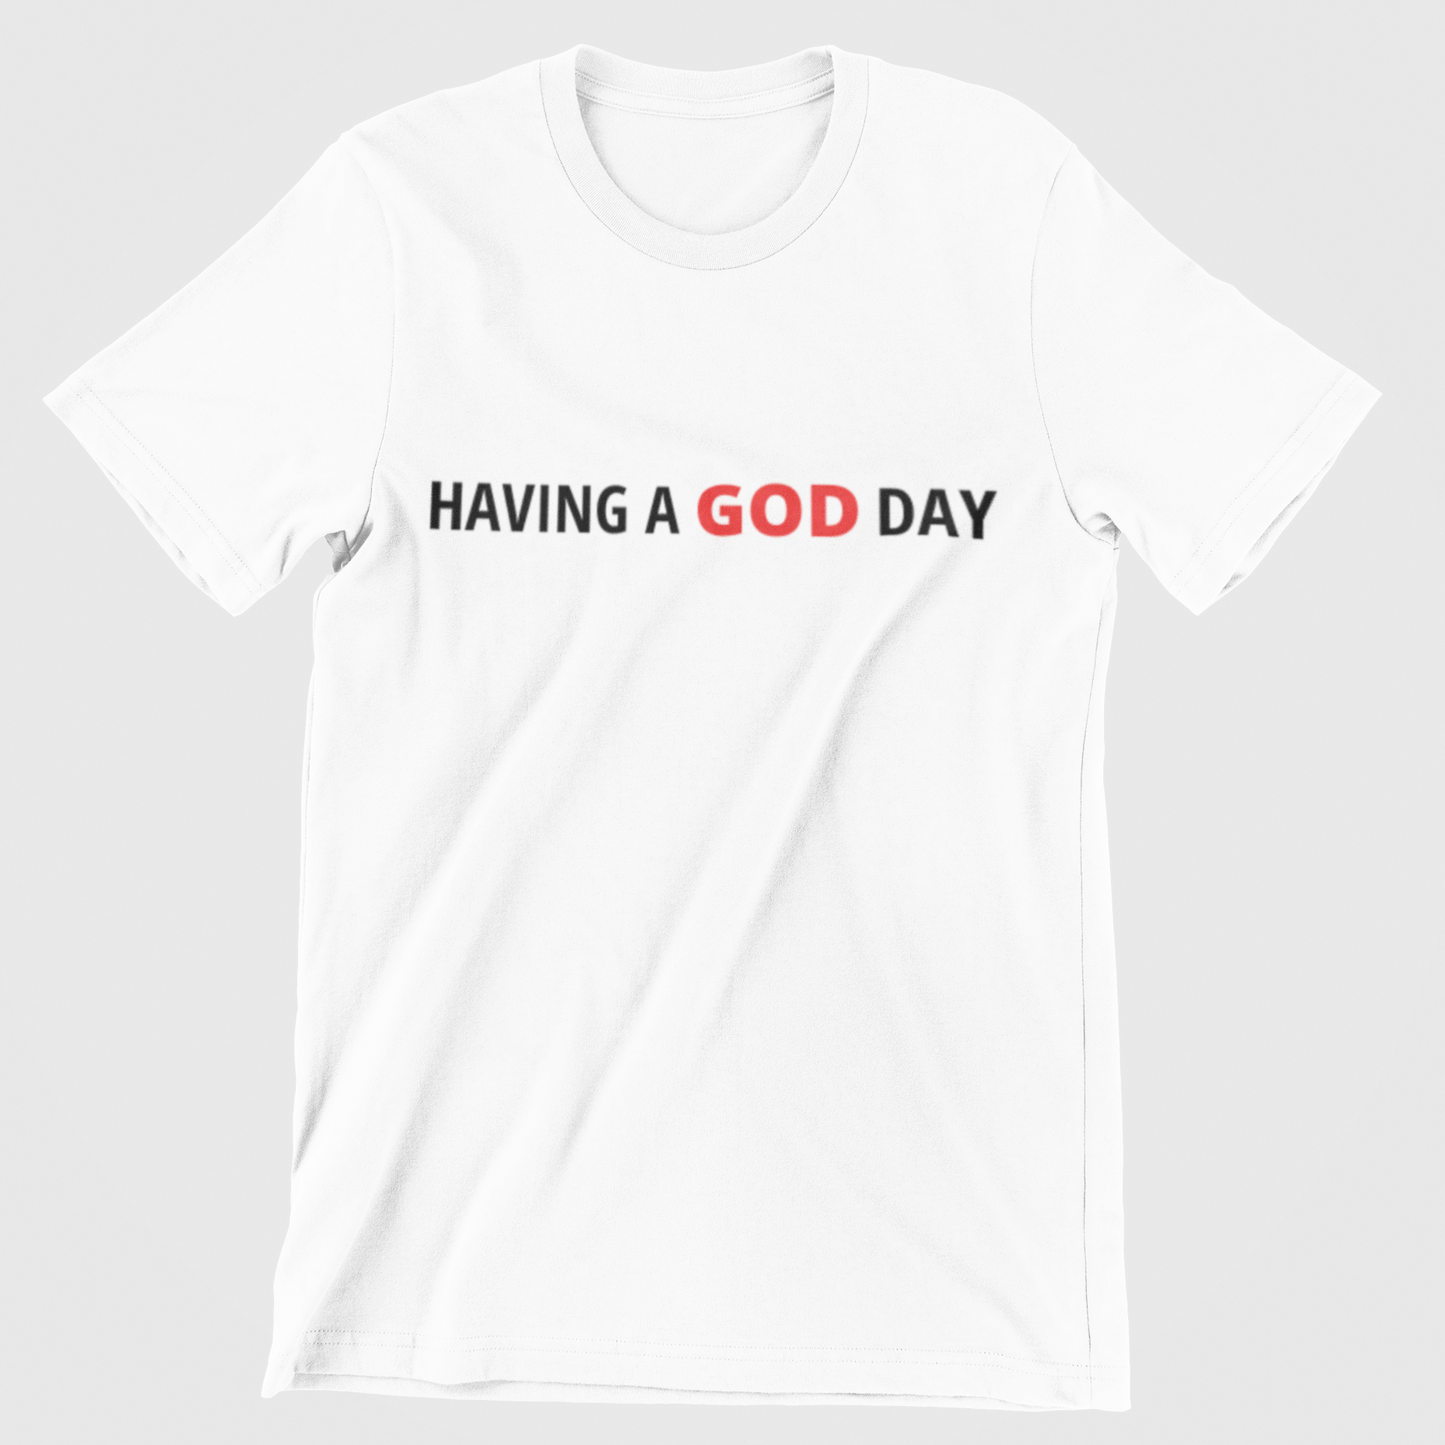 HGD Short Sleeve Tee in White